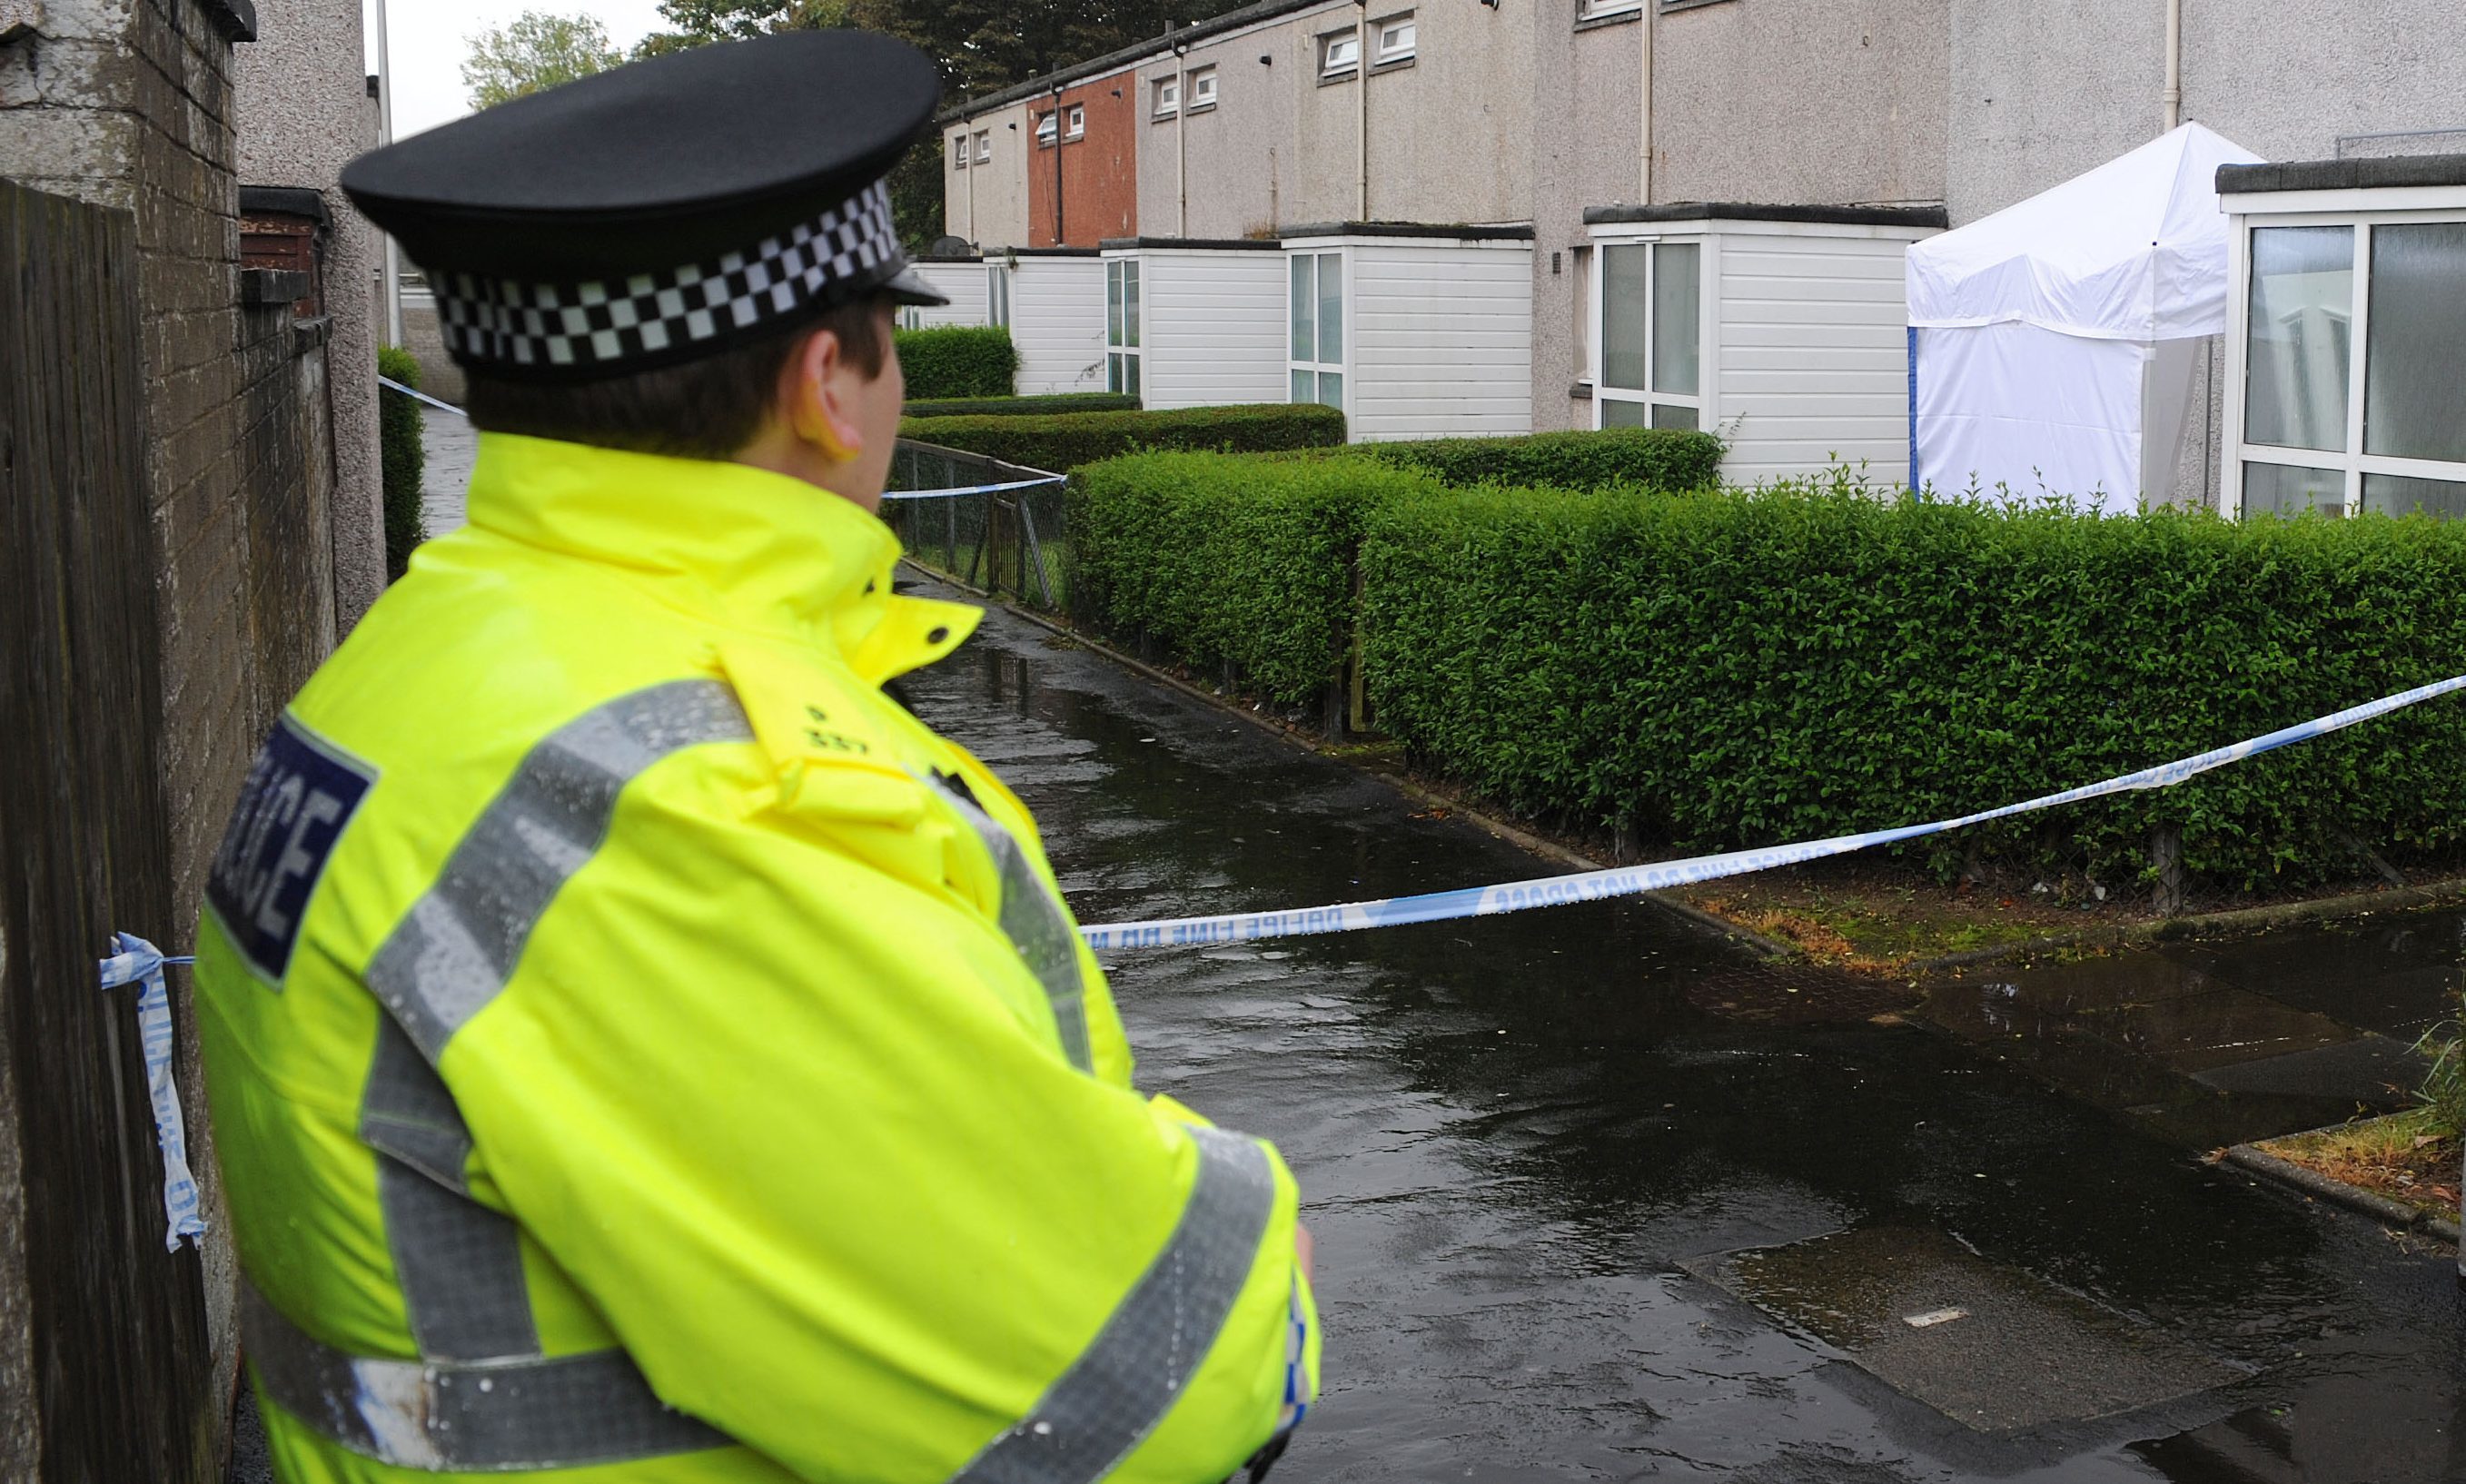 Police guard the house in Glenrothes where the body was found.